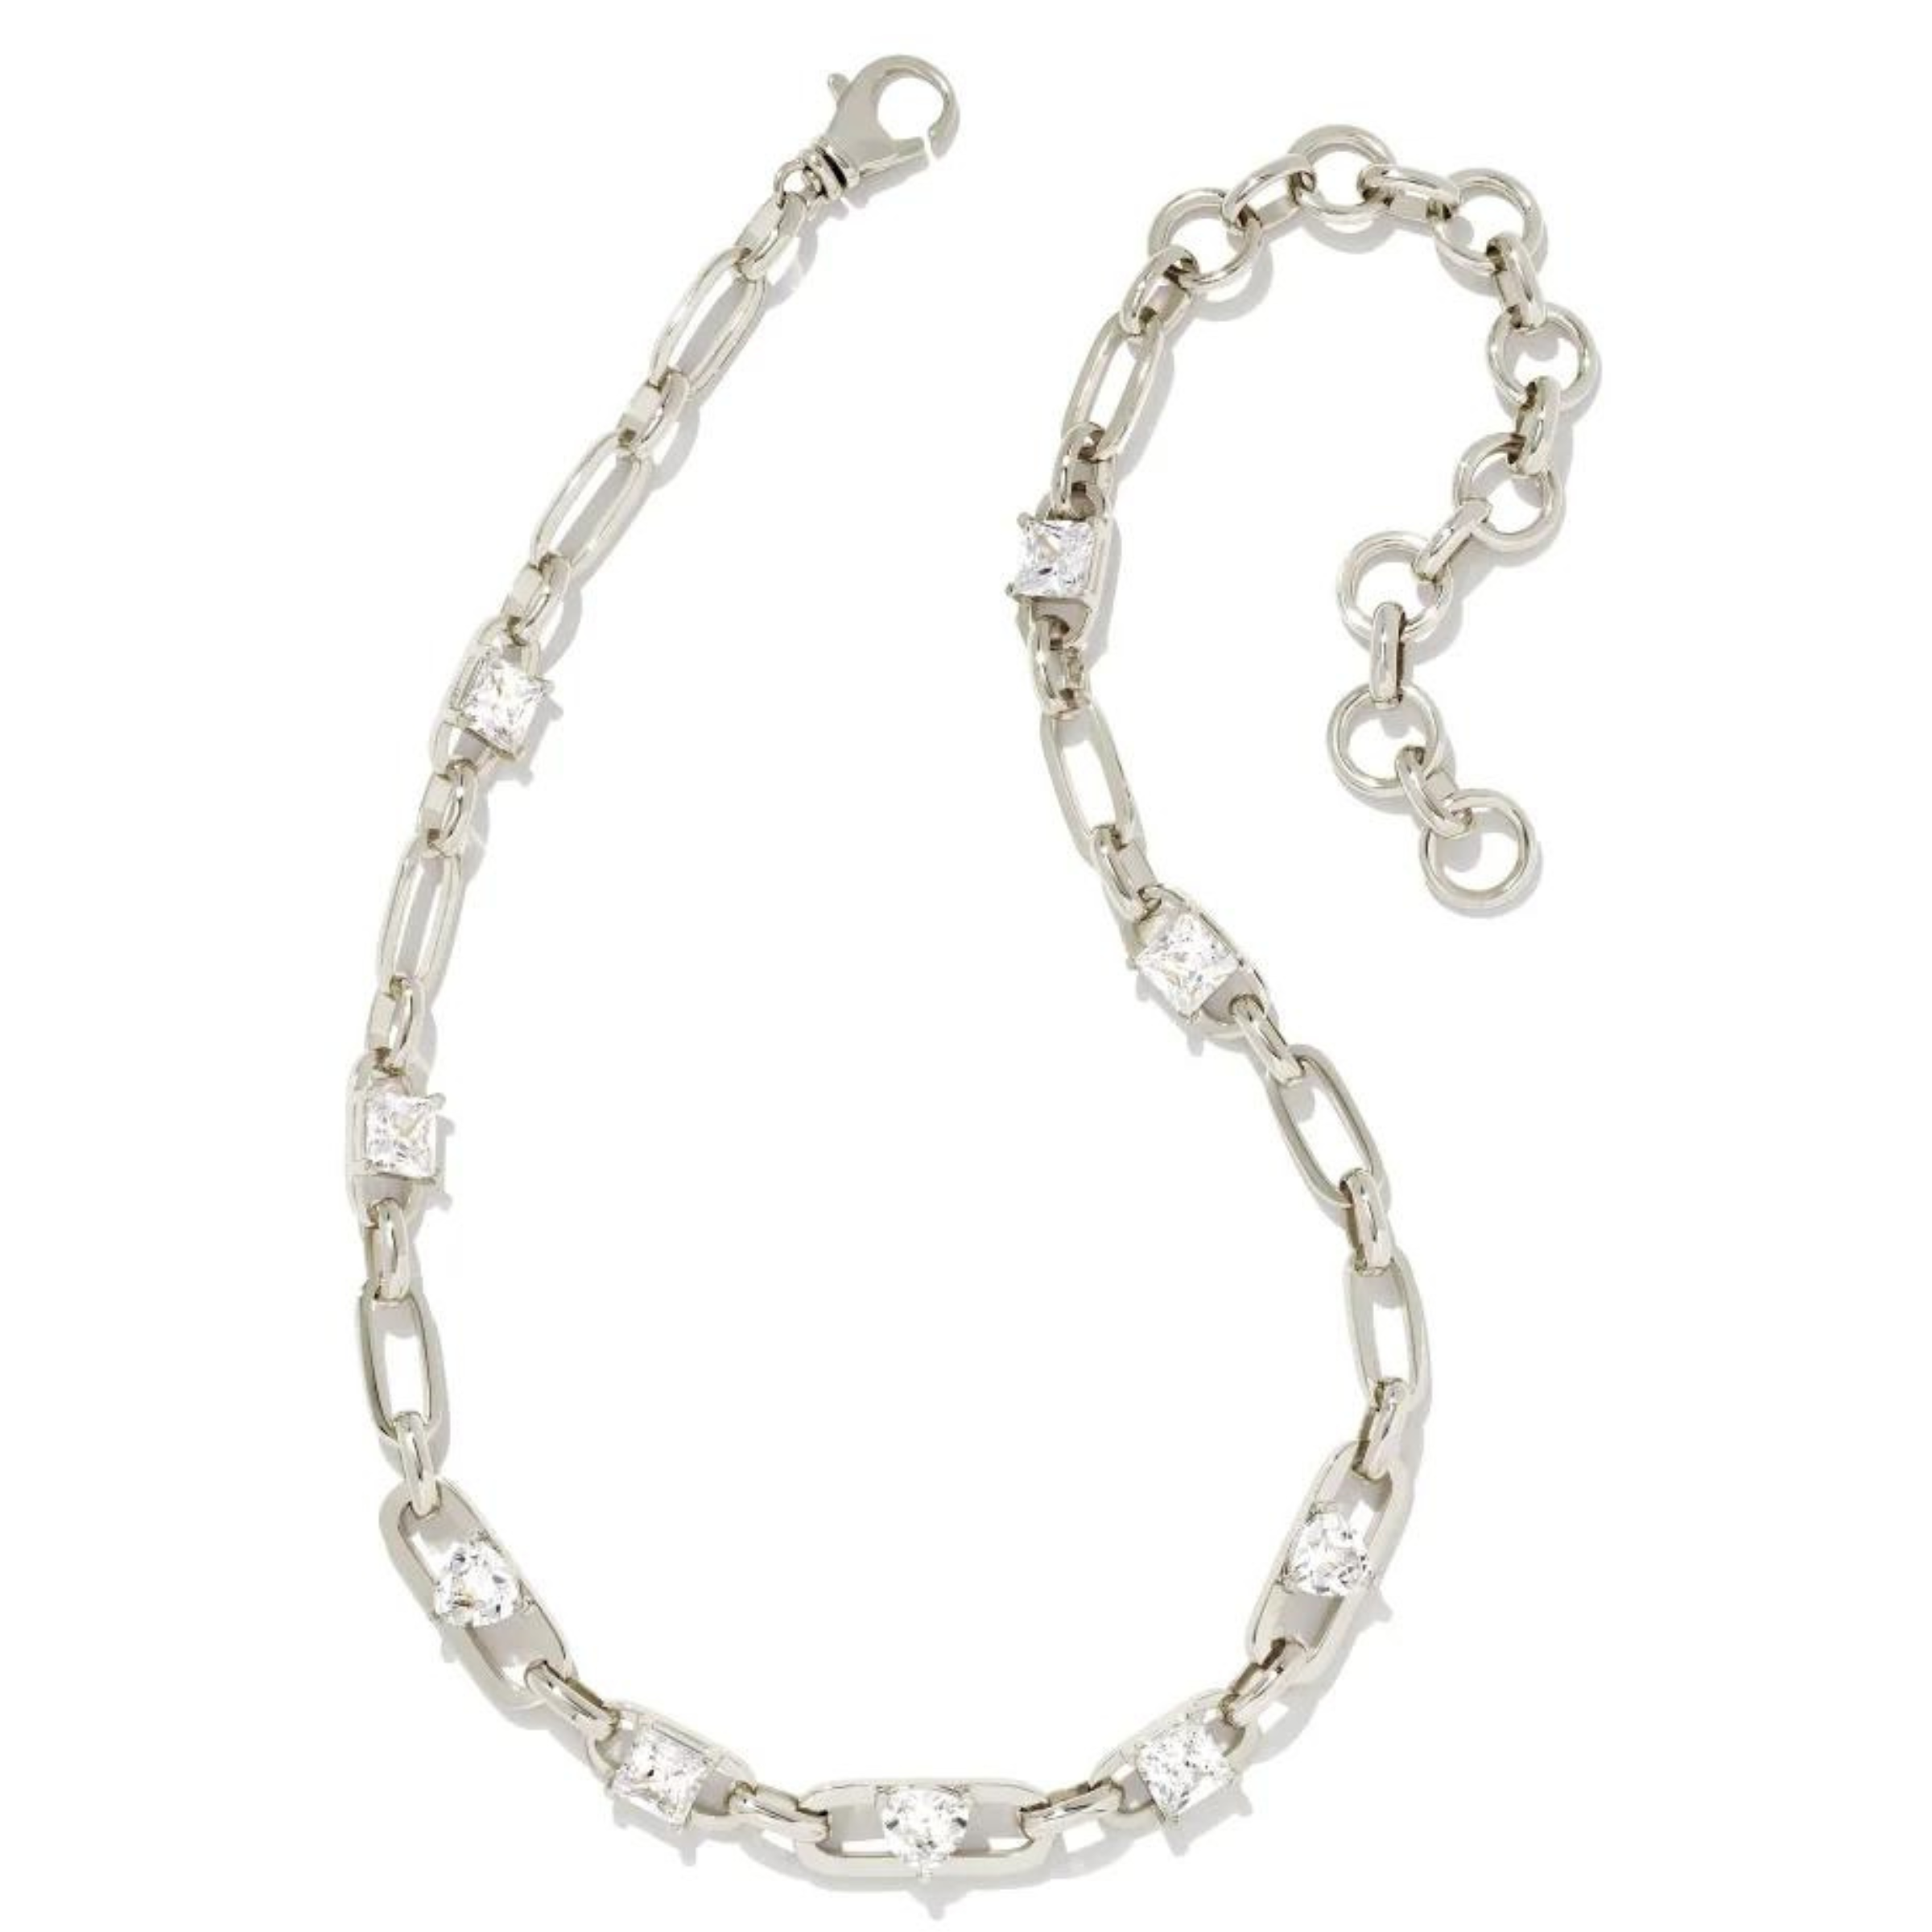 Silver chain necklace with different shaped clear crystals throughout the necklace. This necklace is pictured on a white background. 